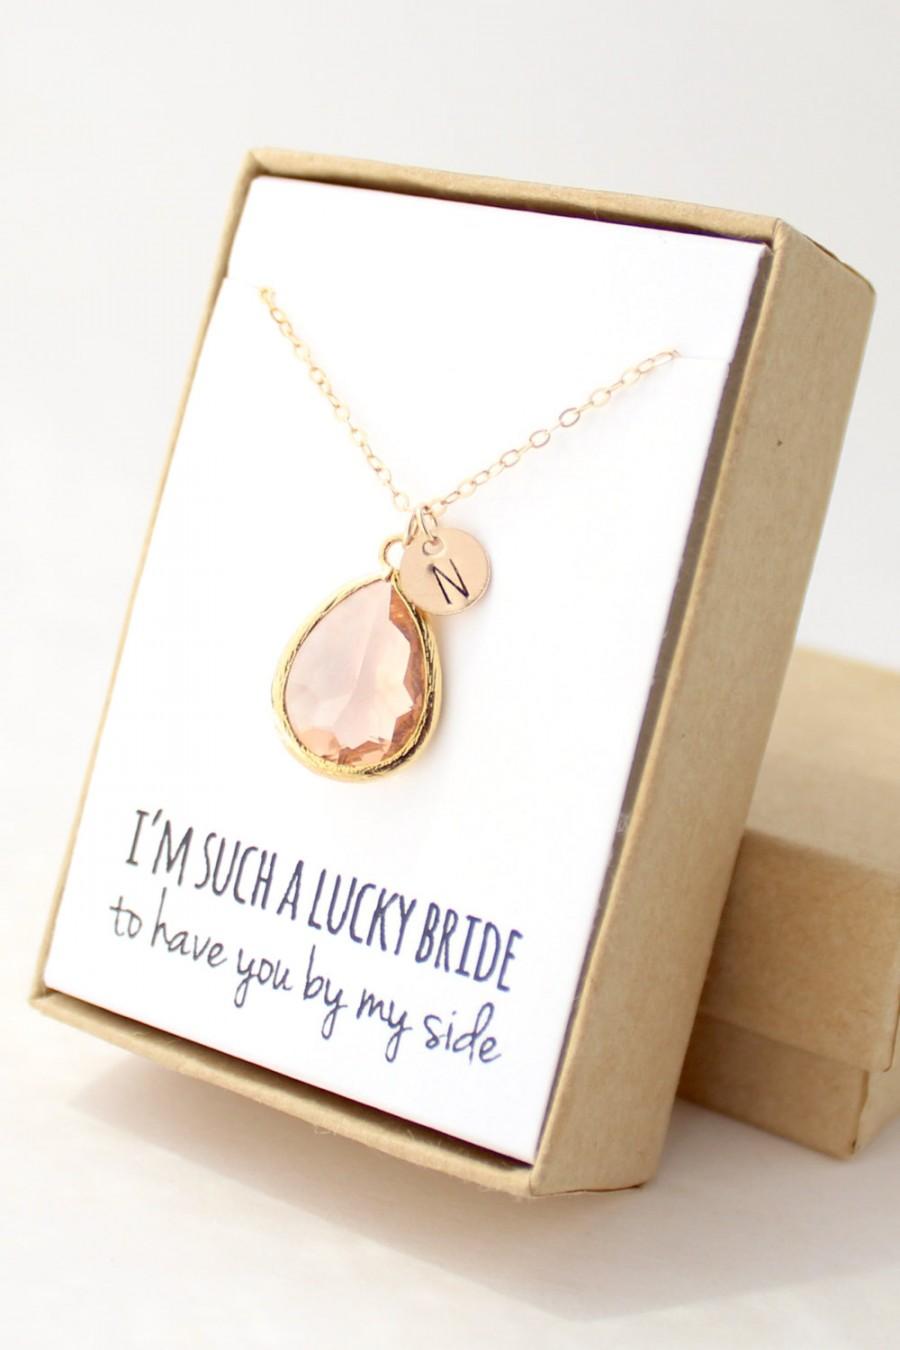 Mariage - Peach Champagne / Gold Teardrop Necklace - Peach Champagne Bridesmaid Necklace - Bridesmaid Gift Jewelry - Peach and Gold Necklace - NB1